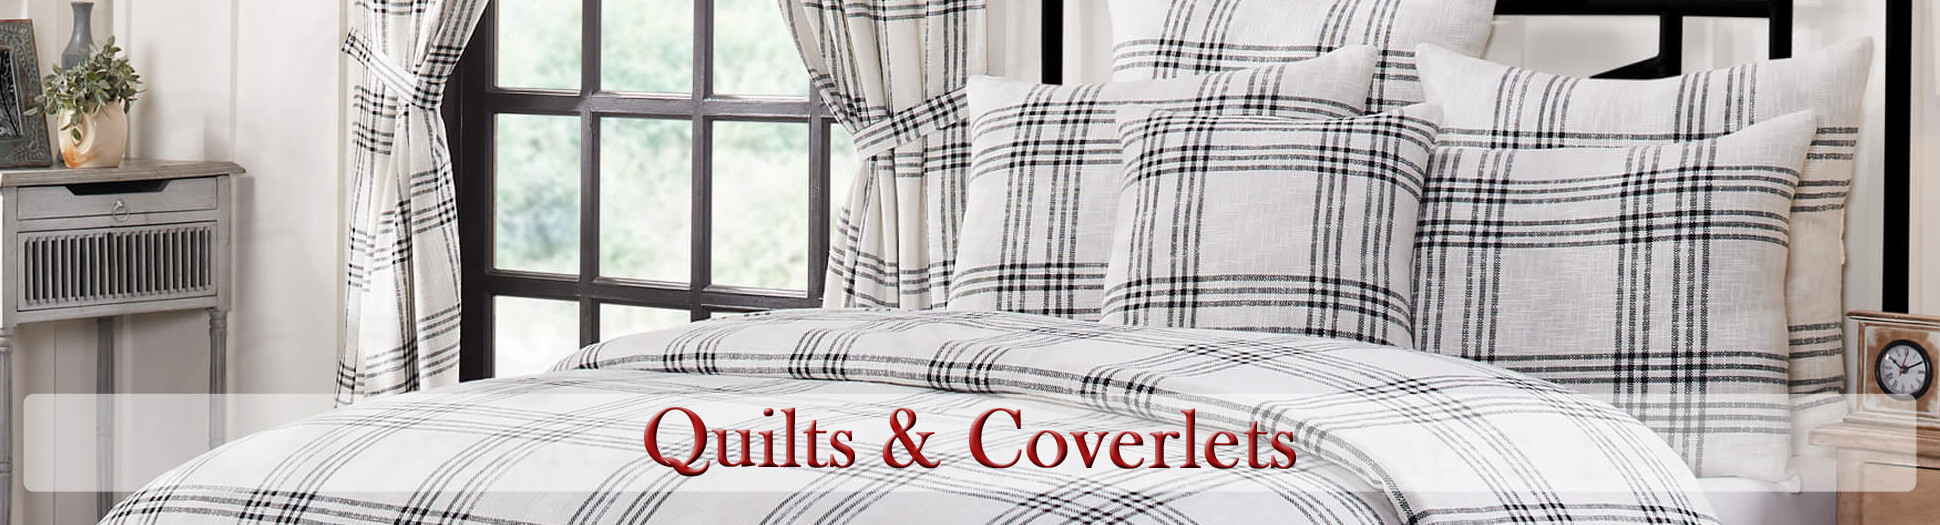 Heirloom Quality and Everyday Quilts and Coverlets